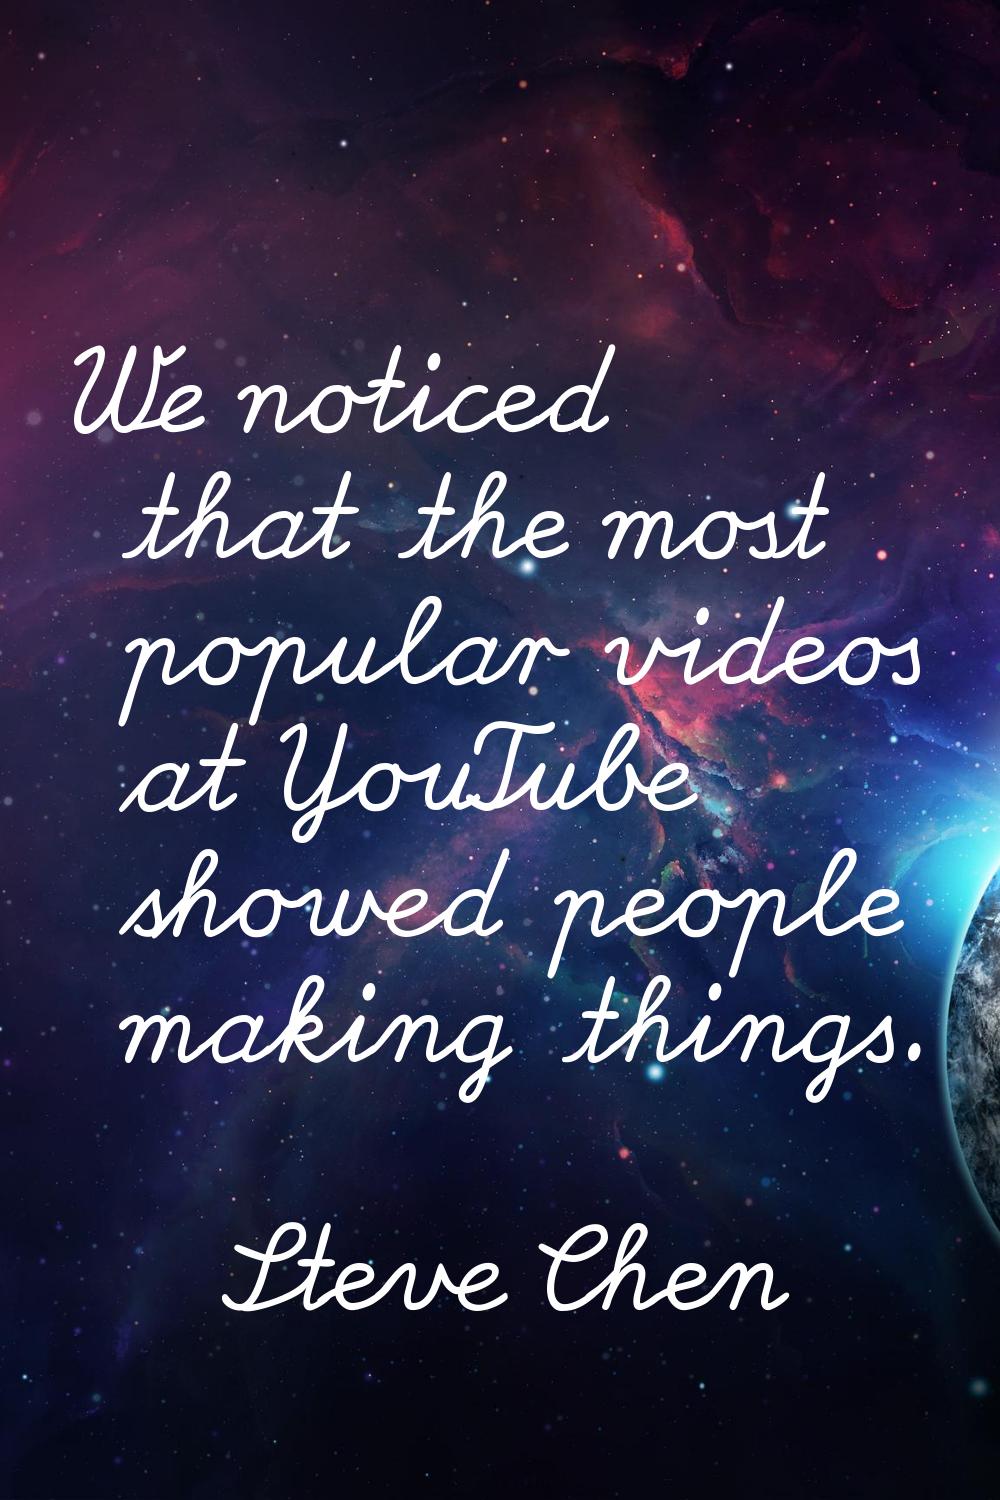 We noticed that the most popular videos at YouTube showed people making things.